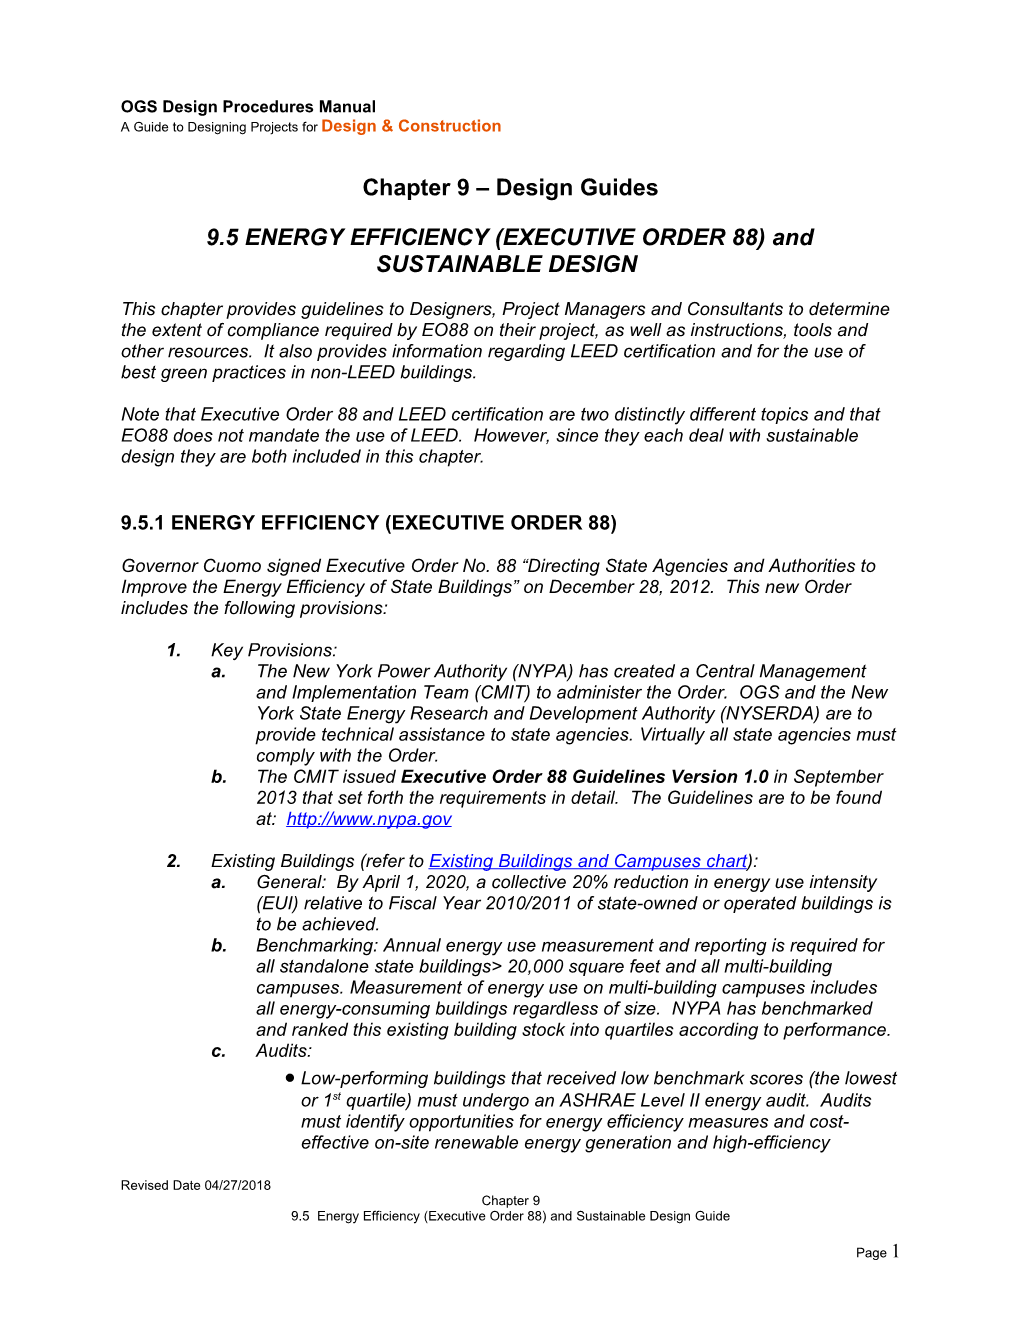 9.5 ENERGY EFFICIENCY (EXECUTIVE ORDER 88) and SUSTAINABLE DESIGN